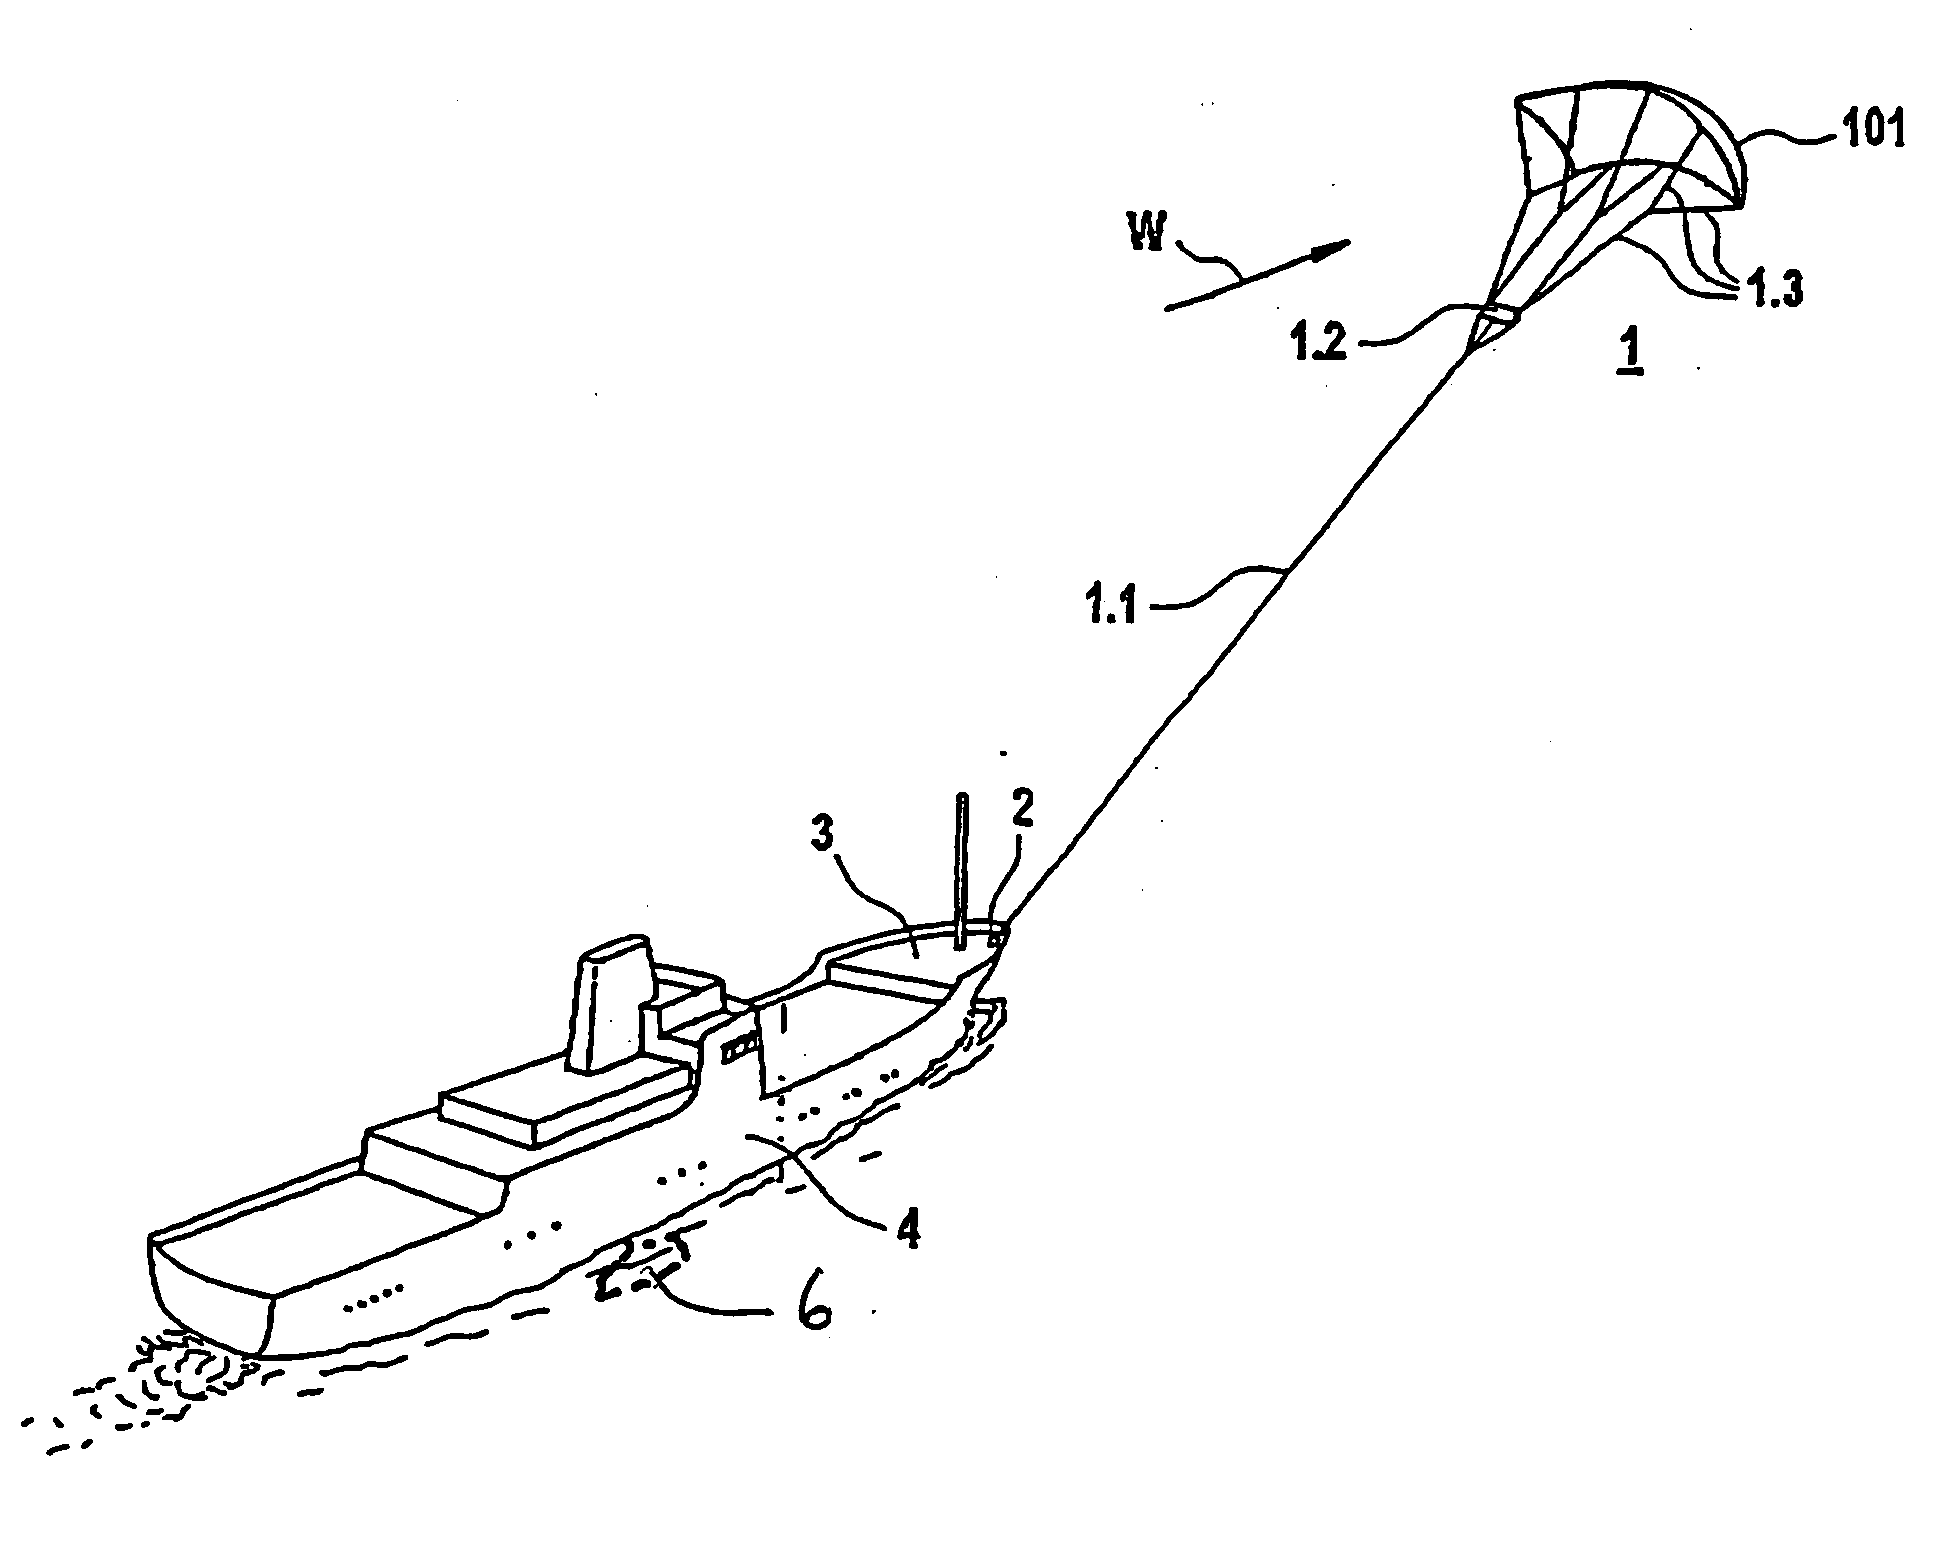 Positioning device for a free-flying kite-type wind-attacked element in a wind-powered watercraft